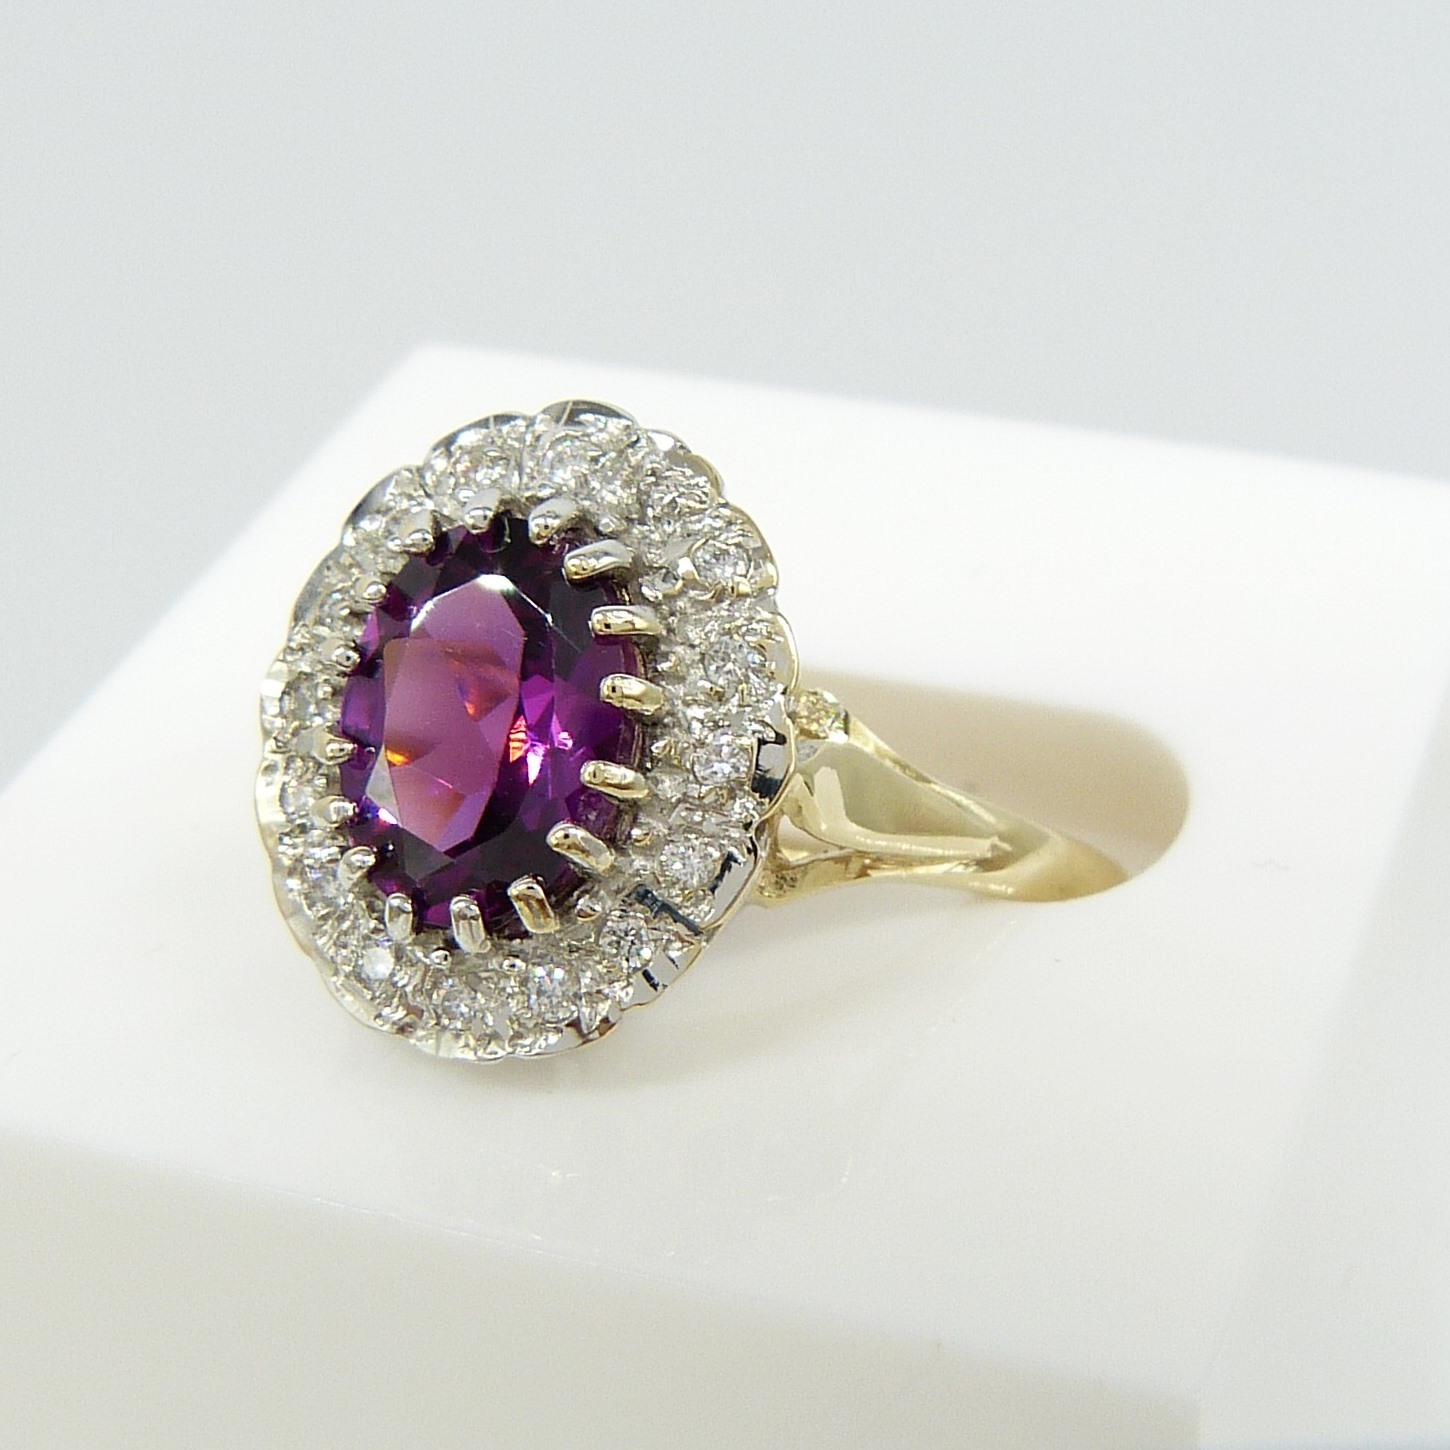 Distinctive Rhodolite Garnet and Diamond Cluster Ring In A Vintage Style - Image 3 of 7